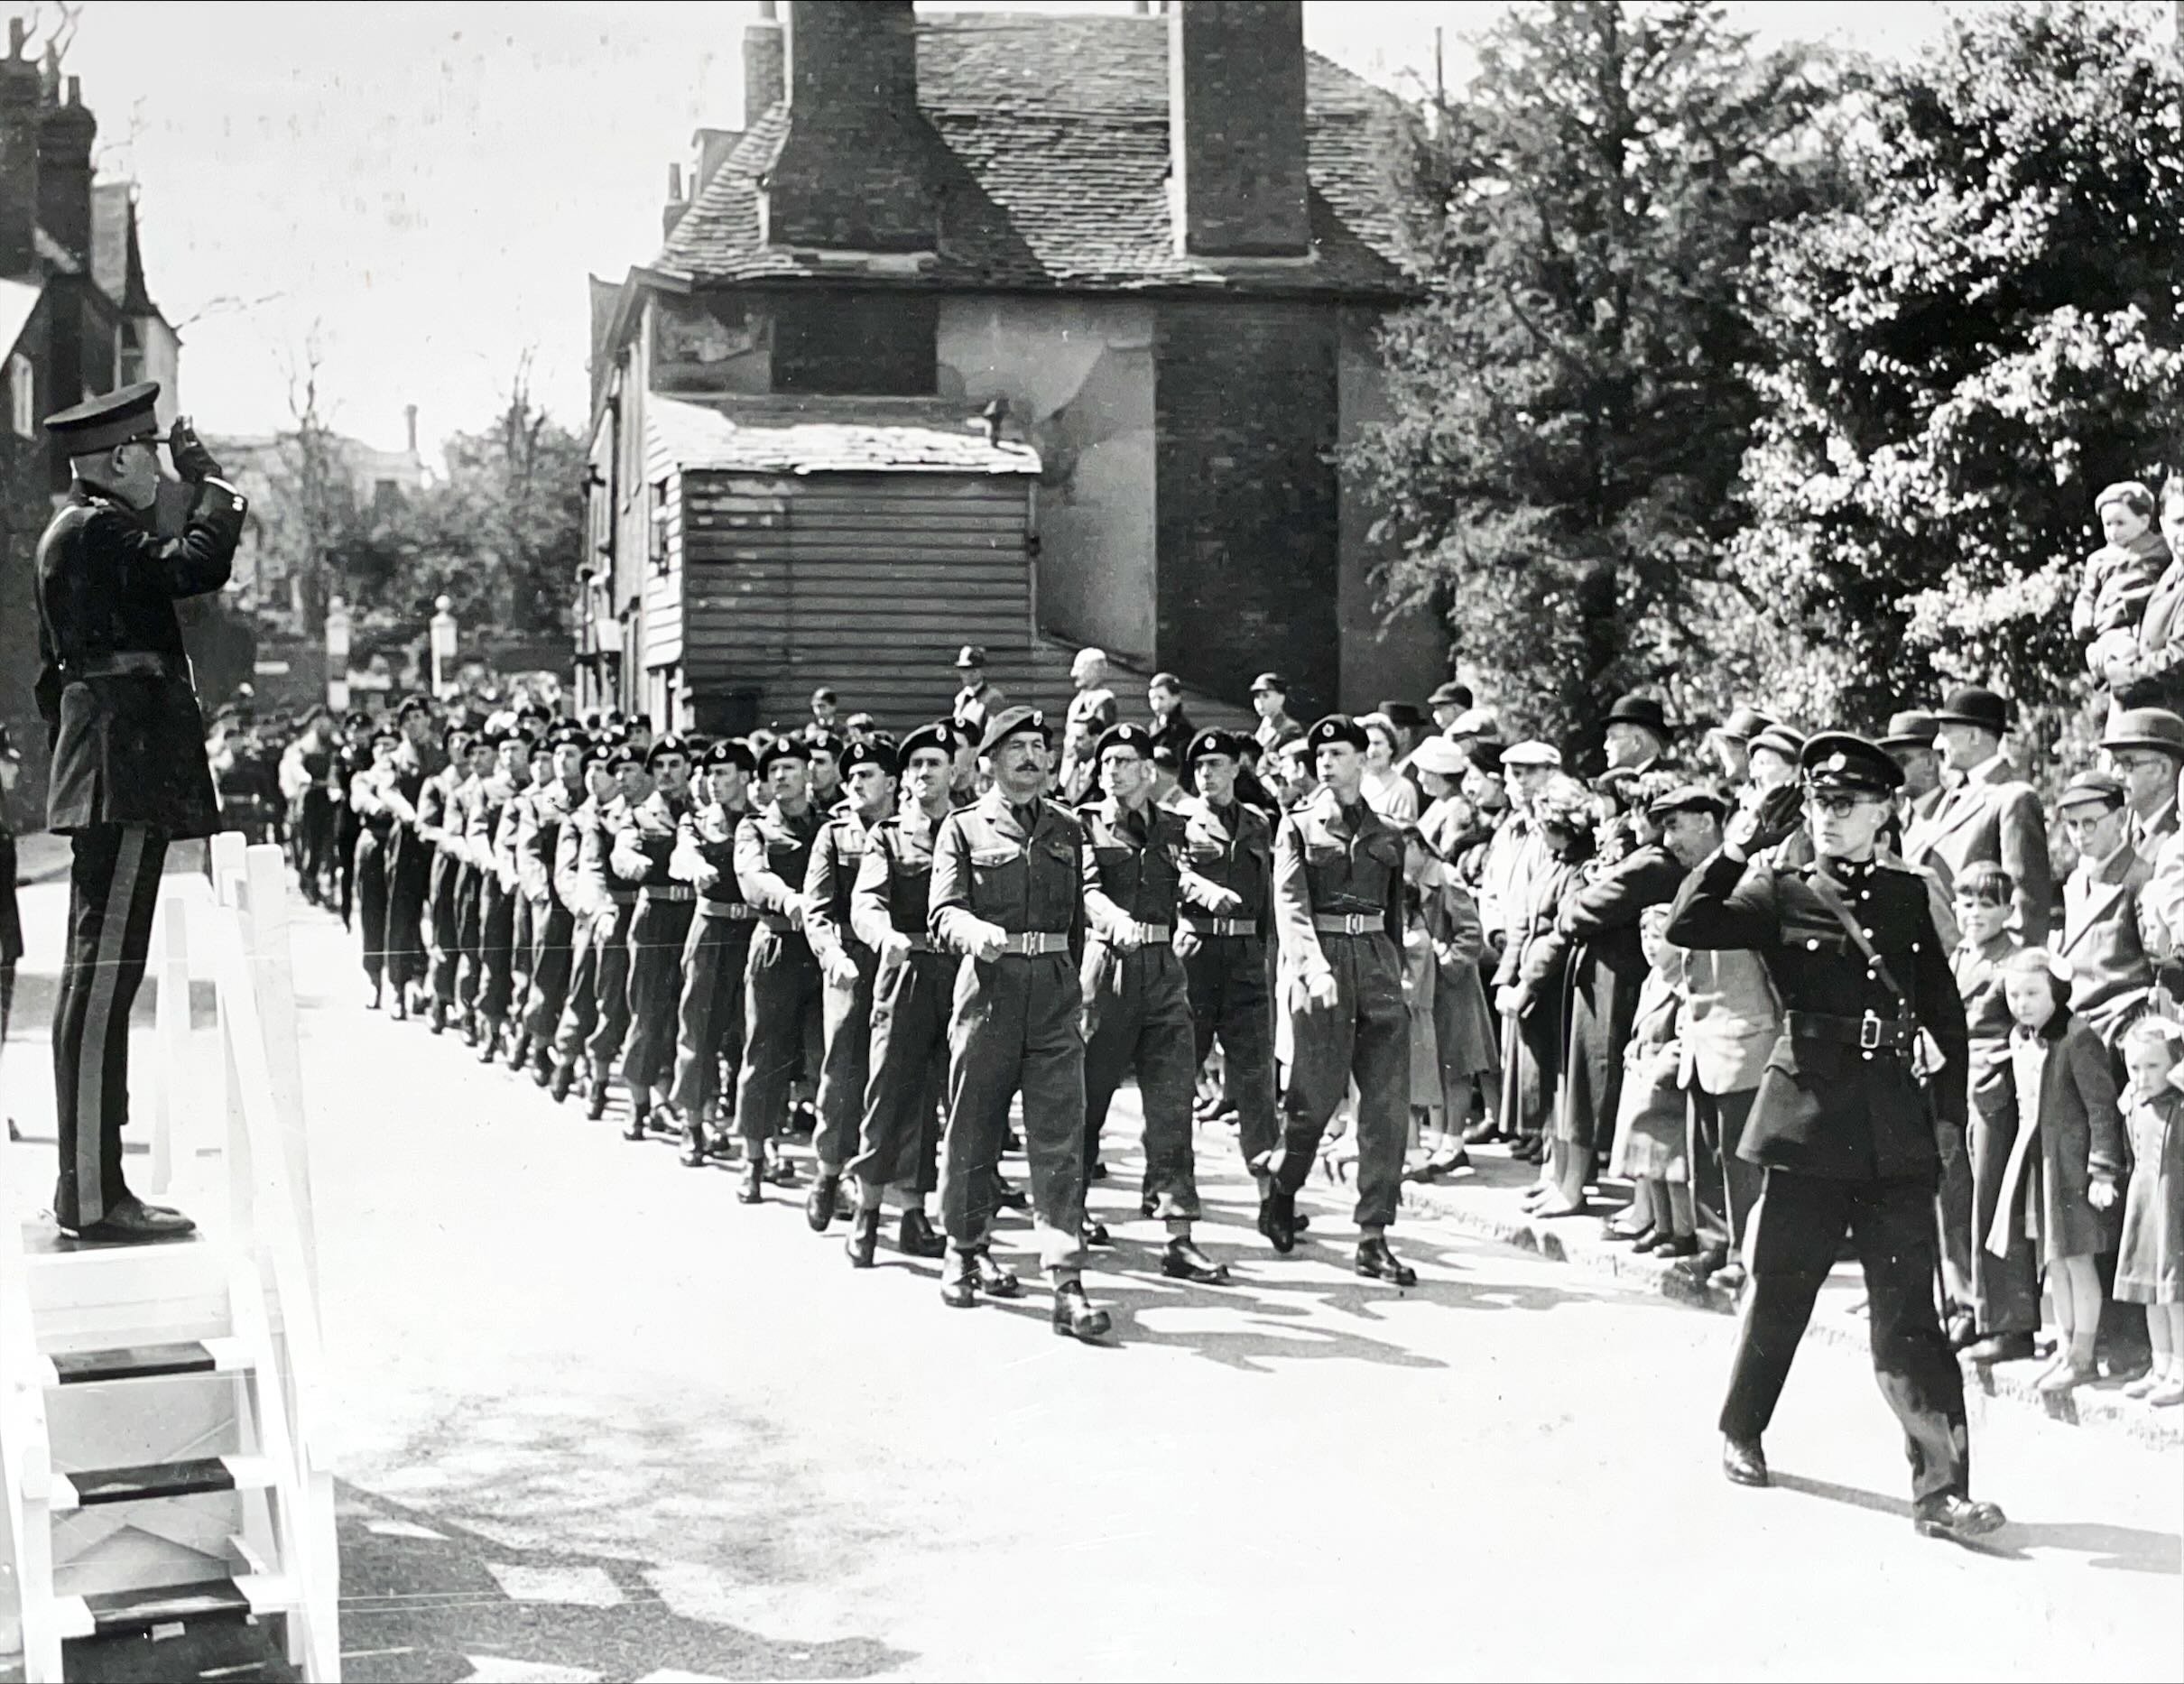 Members of the RE Association march past after service, May 1957